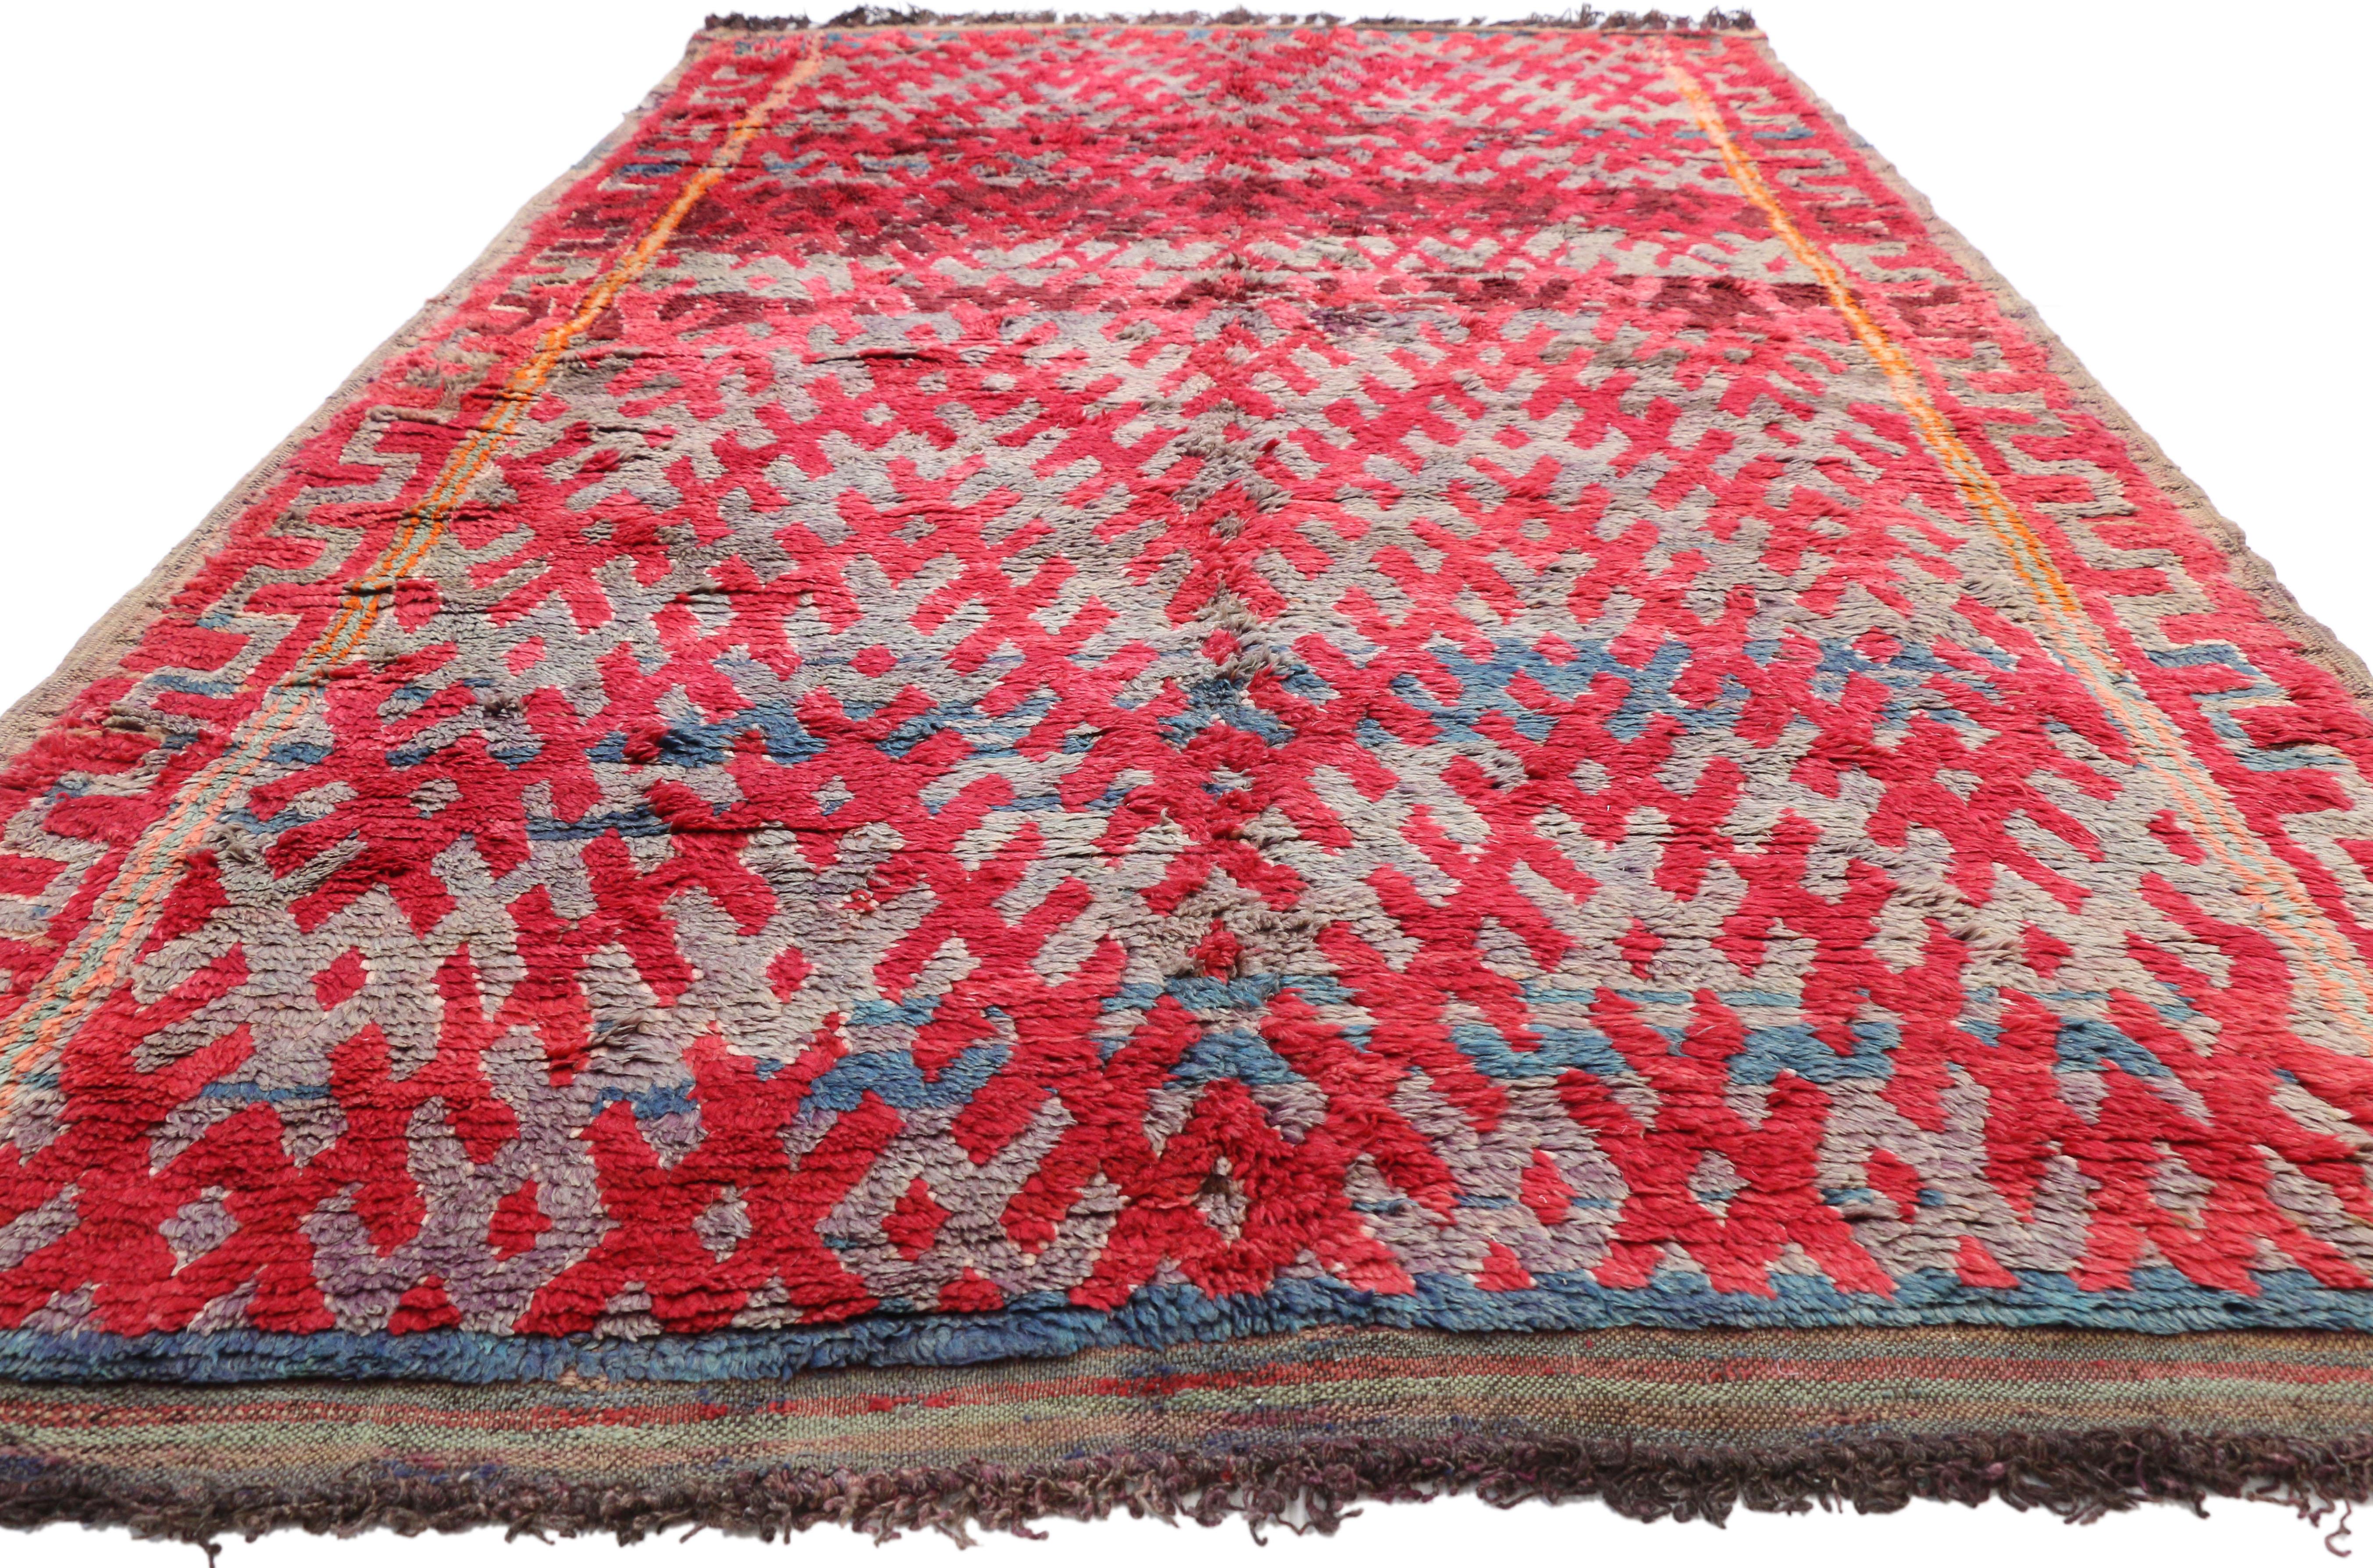 Tribal Vintage Moroccan Rug, Berber Moroccan Rug with Vibrant Mid-Century Modern Style